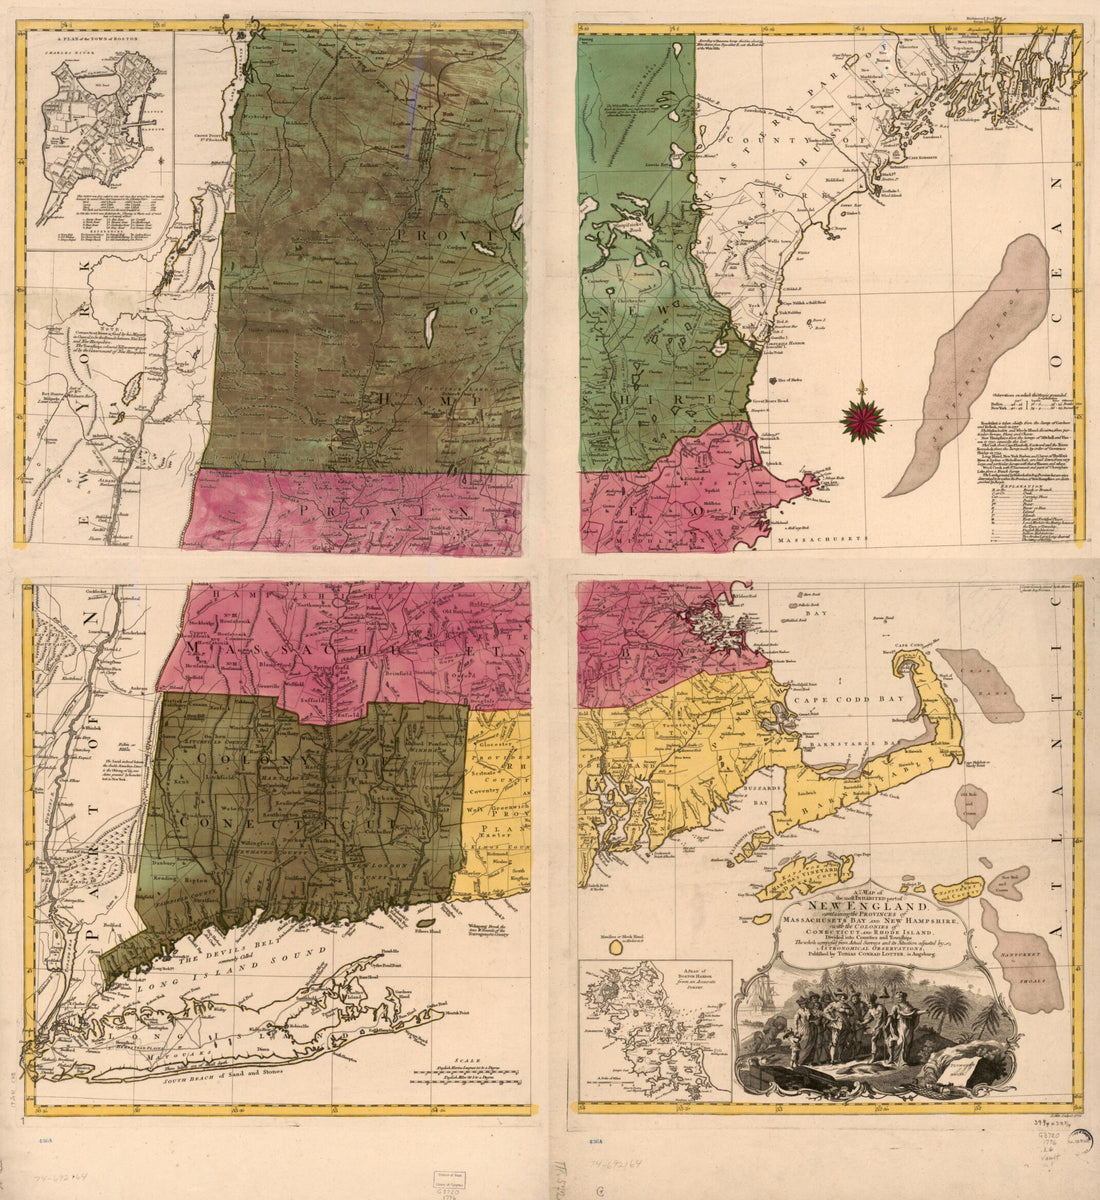 This old map of A Map of the Most Inhabited Part of New England : Containing the Provinces of Massachusets Bay and New Hampshire, With the Colonies of Conecticut and Rhode Island, Divided Into Counties and Townships from 1776 was created by Tobias Conrad